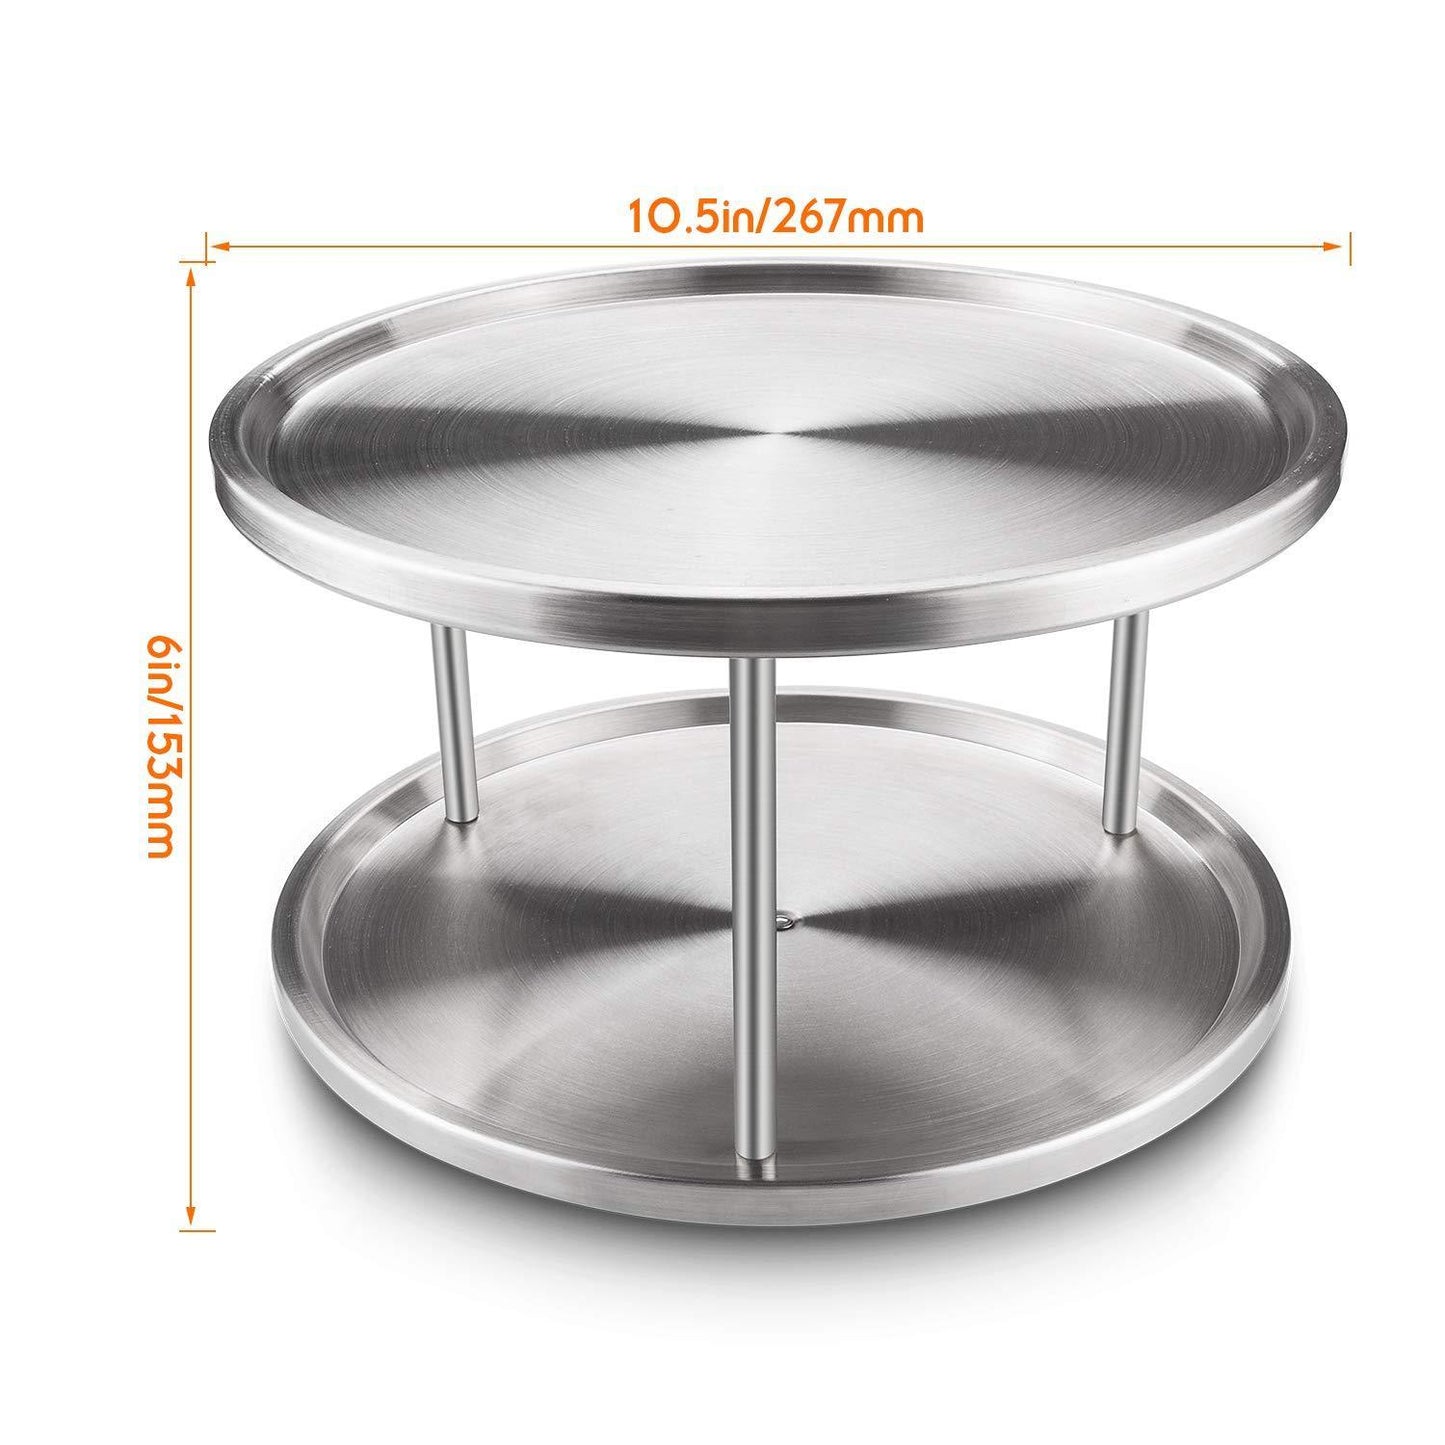 Get starvast 2 pack 2 tier stainless steel lazy susan turntable 10 inch 360 degree lazy susan spice rack organizer for kitchen cabinet countertop centerpiece